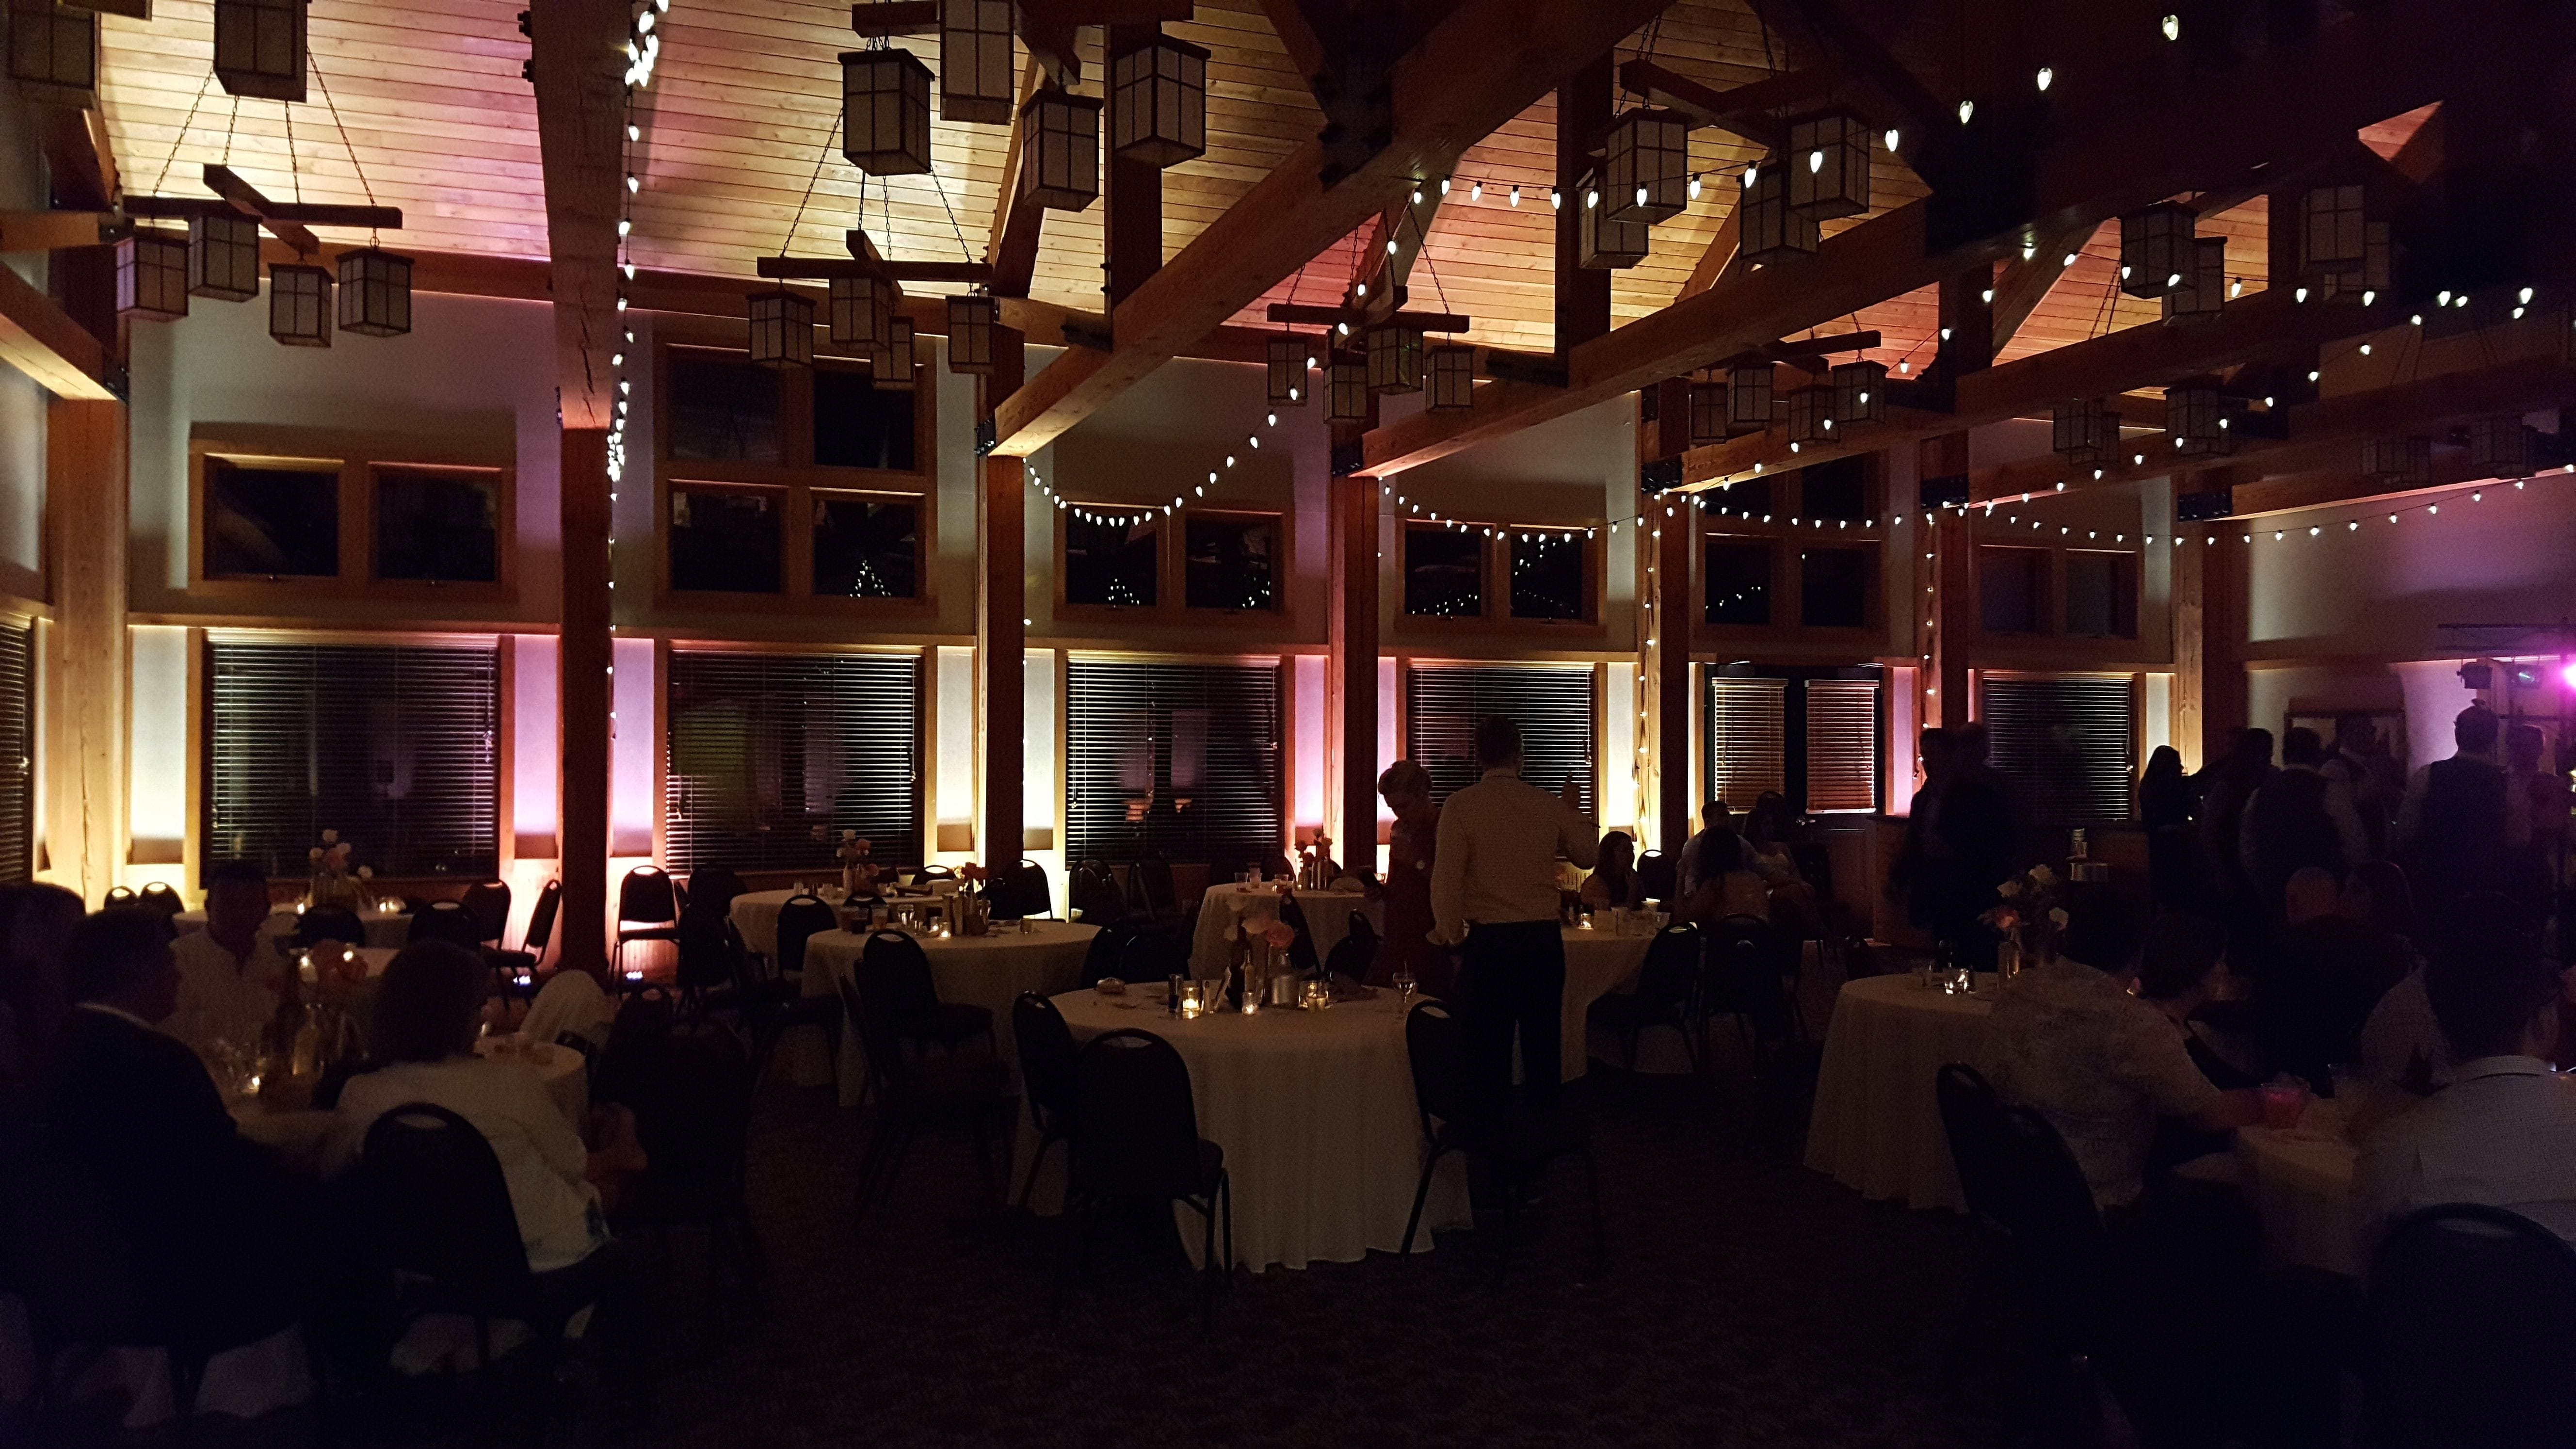 Wedding lighting at the Heartwood Resort in Trego, WI. Up lighting in rose gold and warm white with bistro.